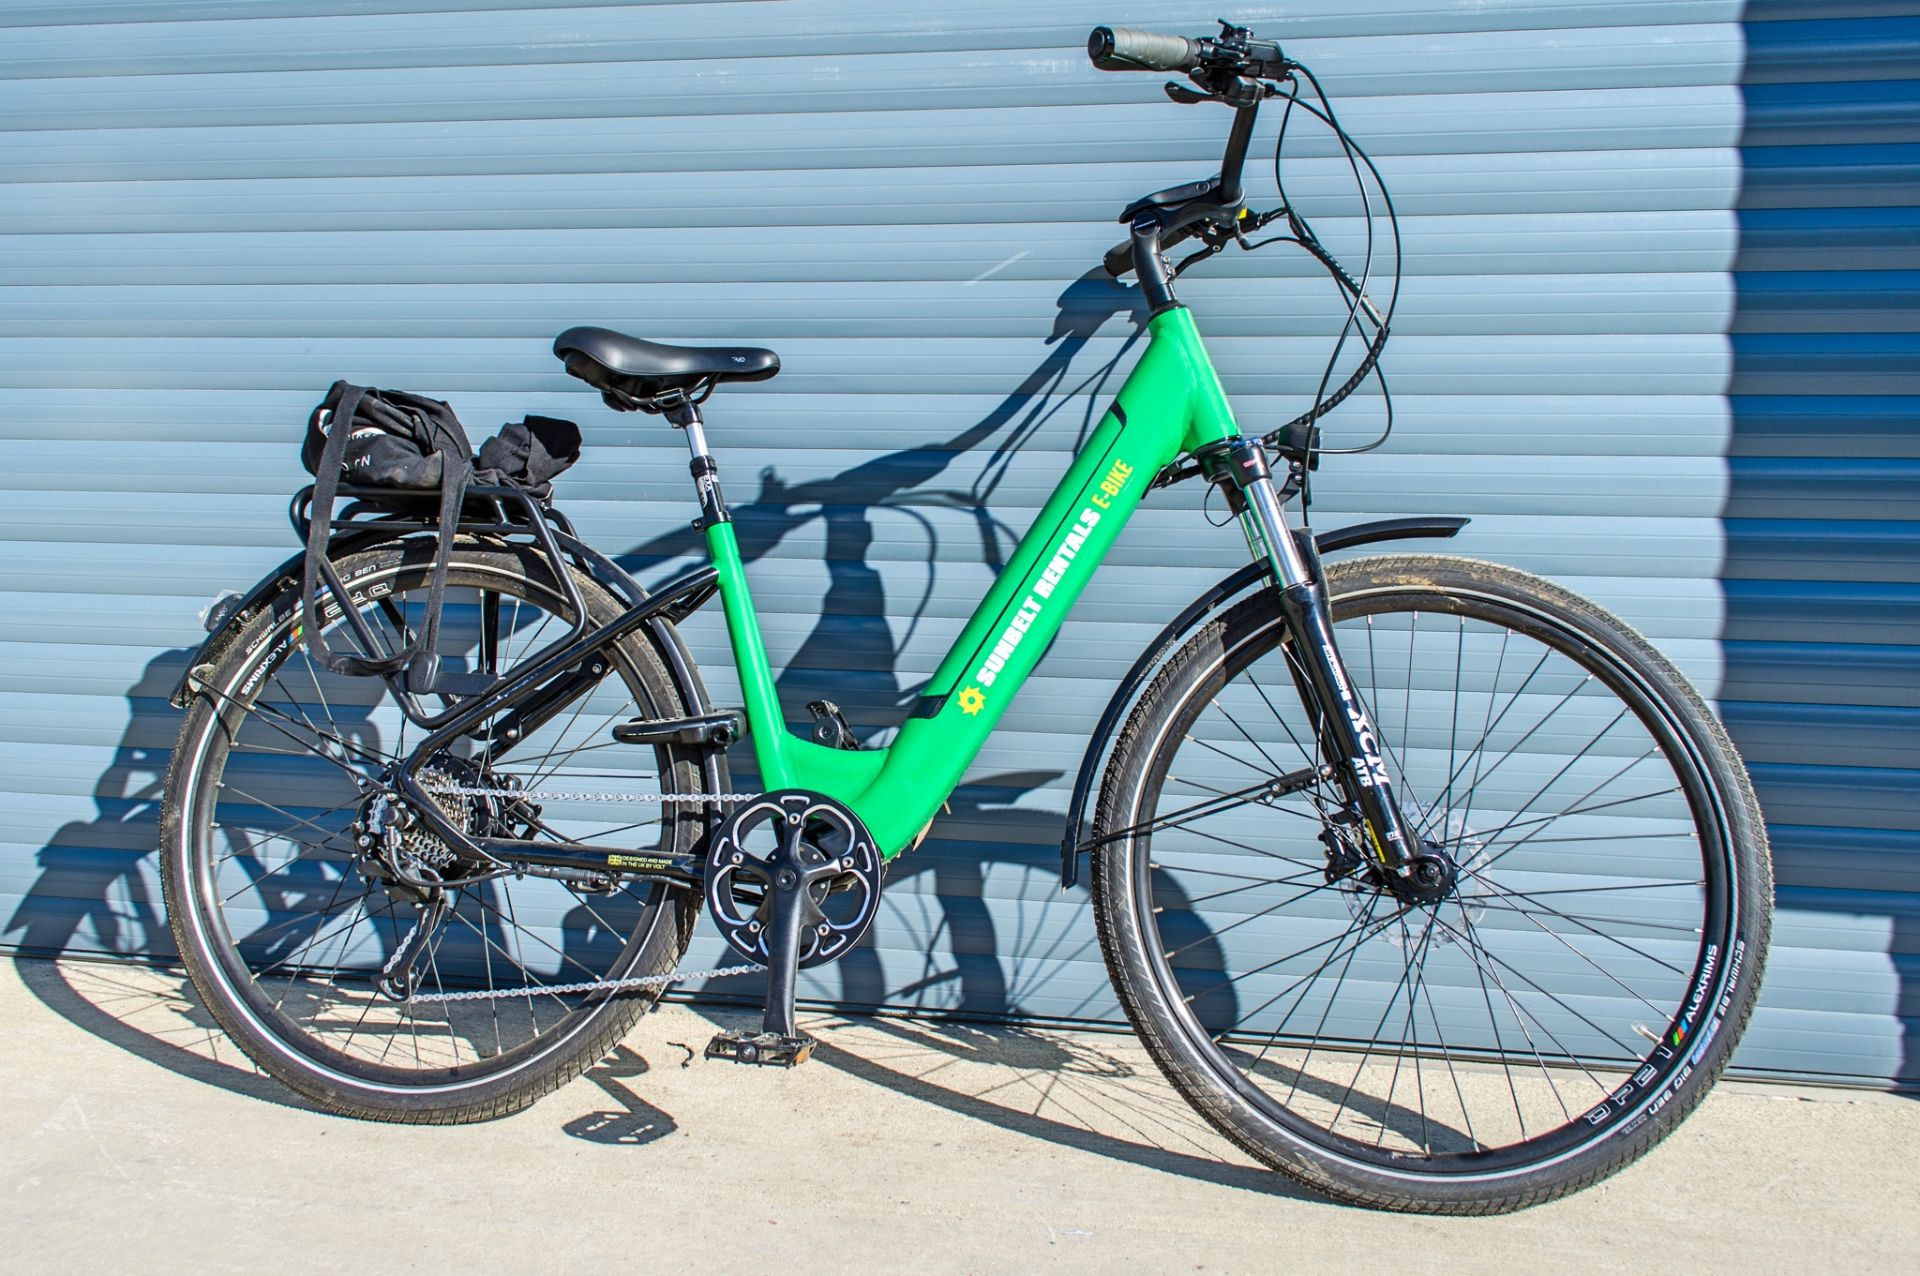 Volt Burlington e-bike Recorded Mileage: 12 c/w keys, security fob, charger & owners manual - Image 2 of 3